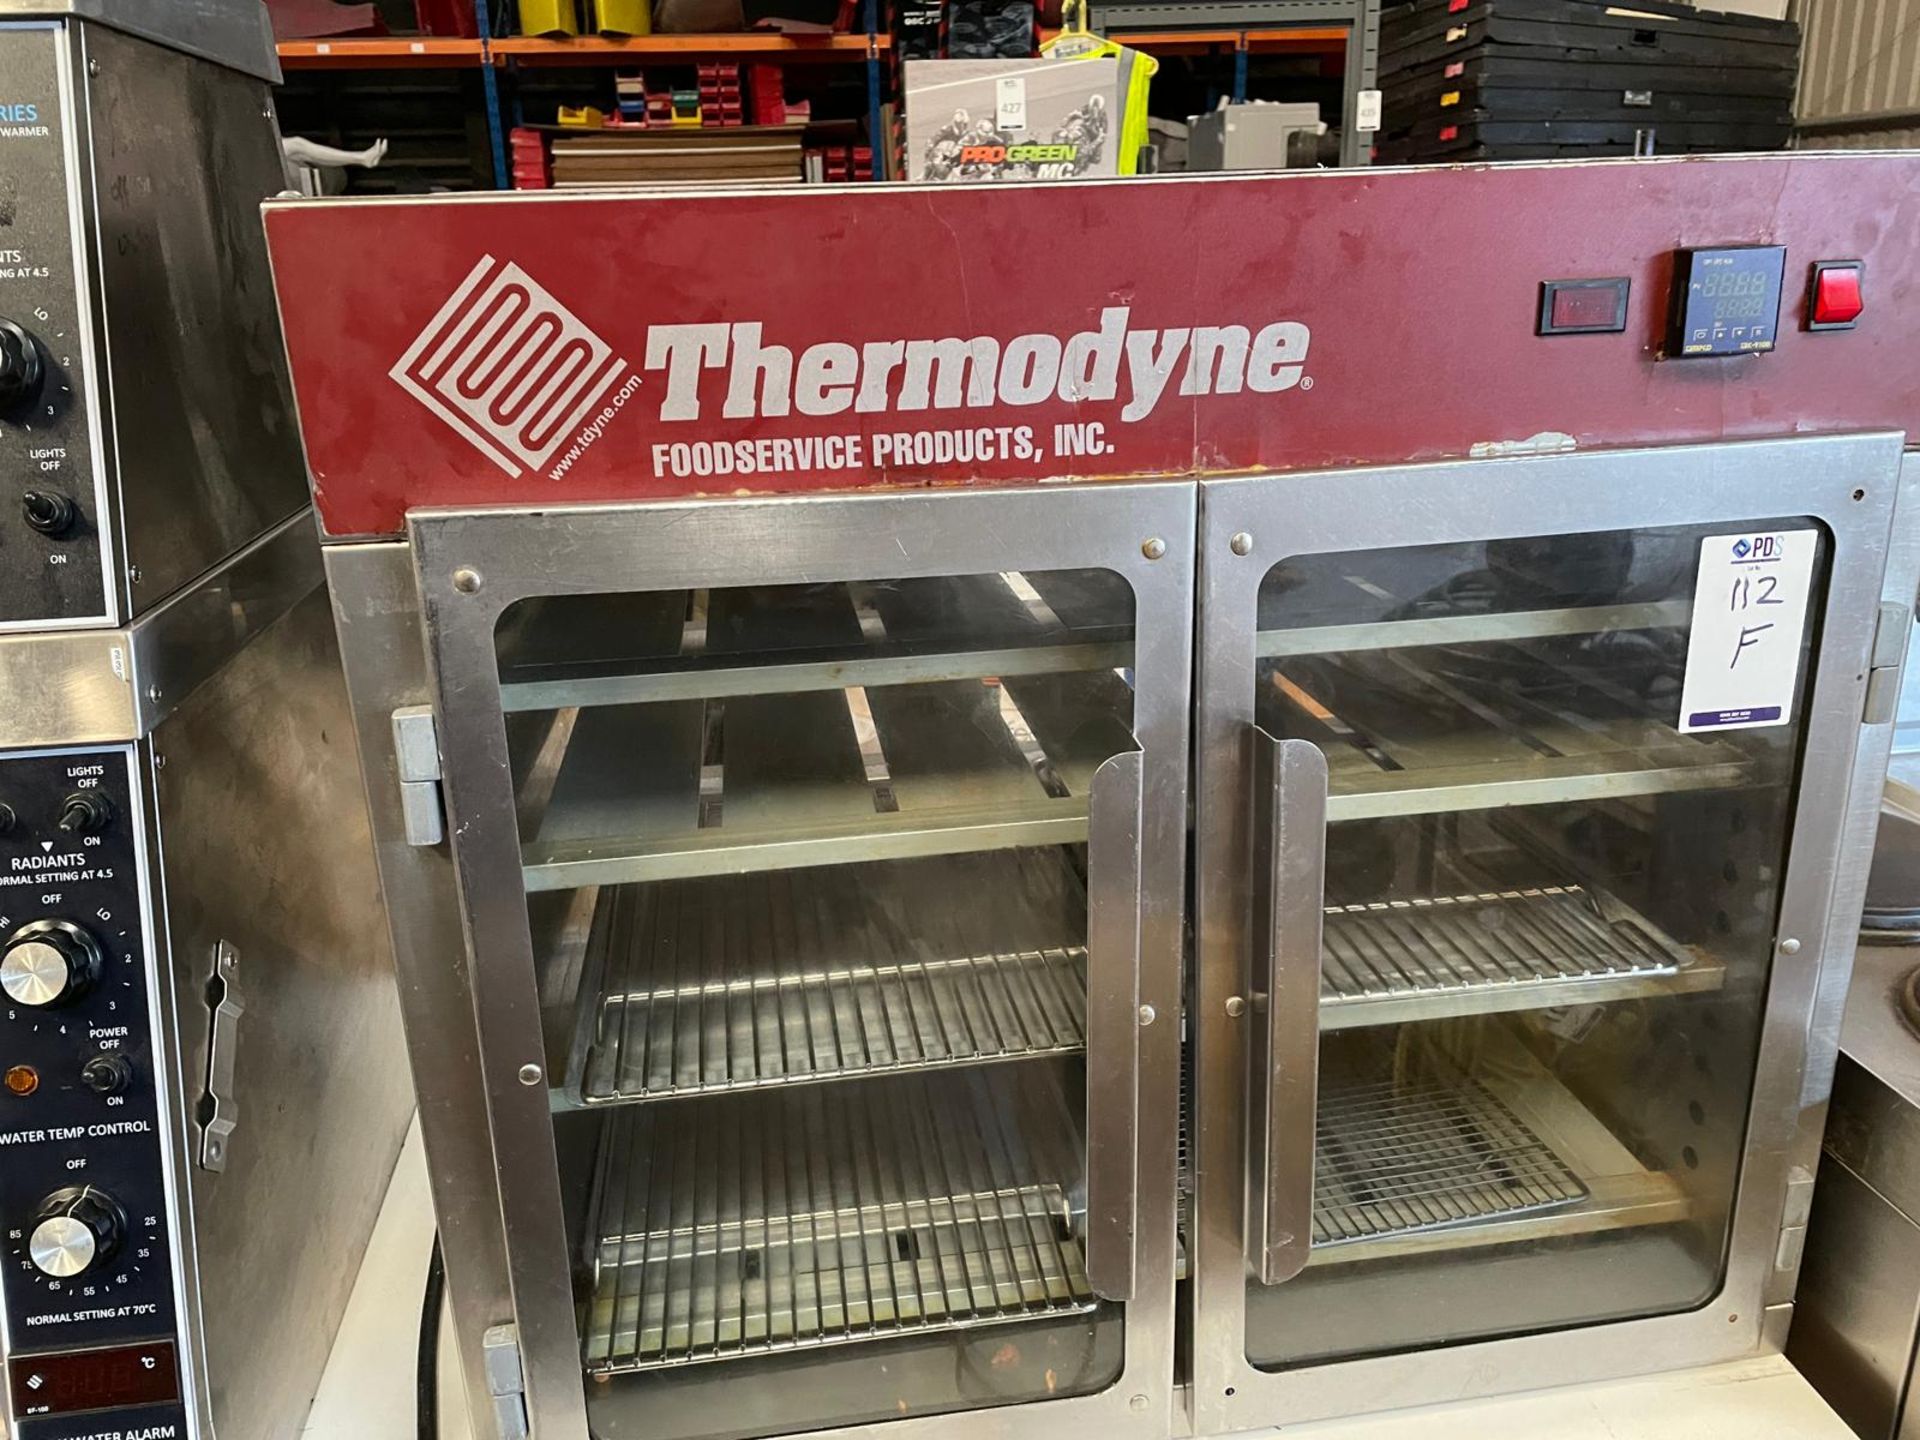 Thermodyne 700CT Shelf Oven, Serial Number 11661 (Location Brentwood. Please Refer to General